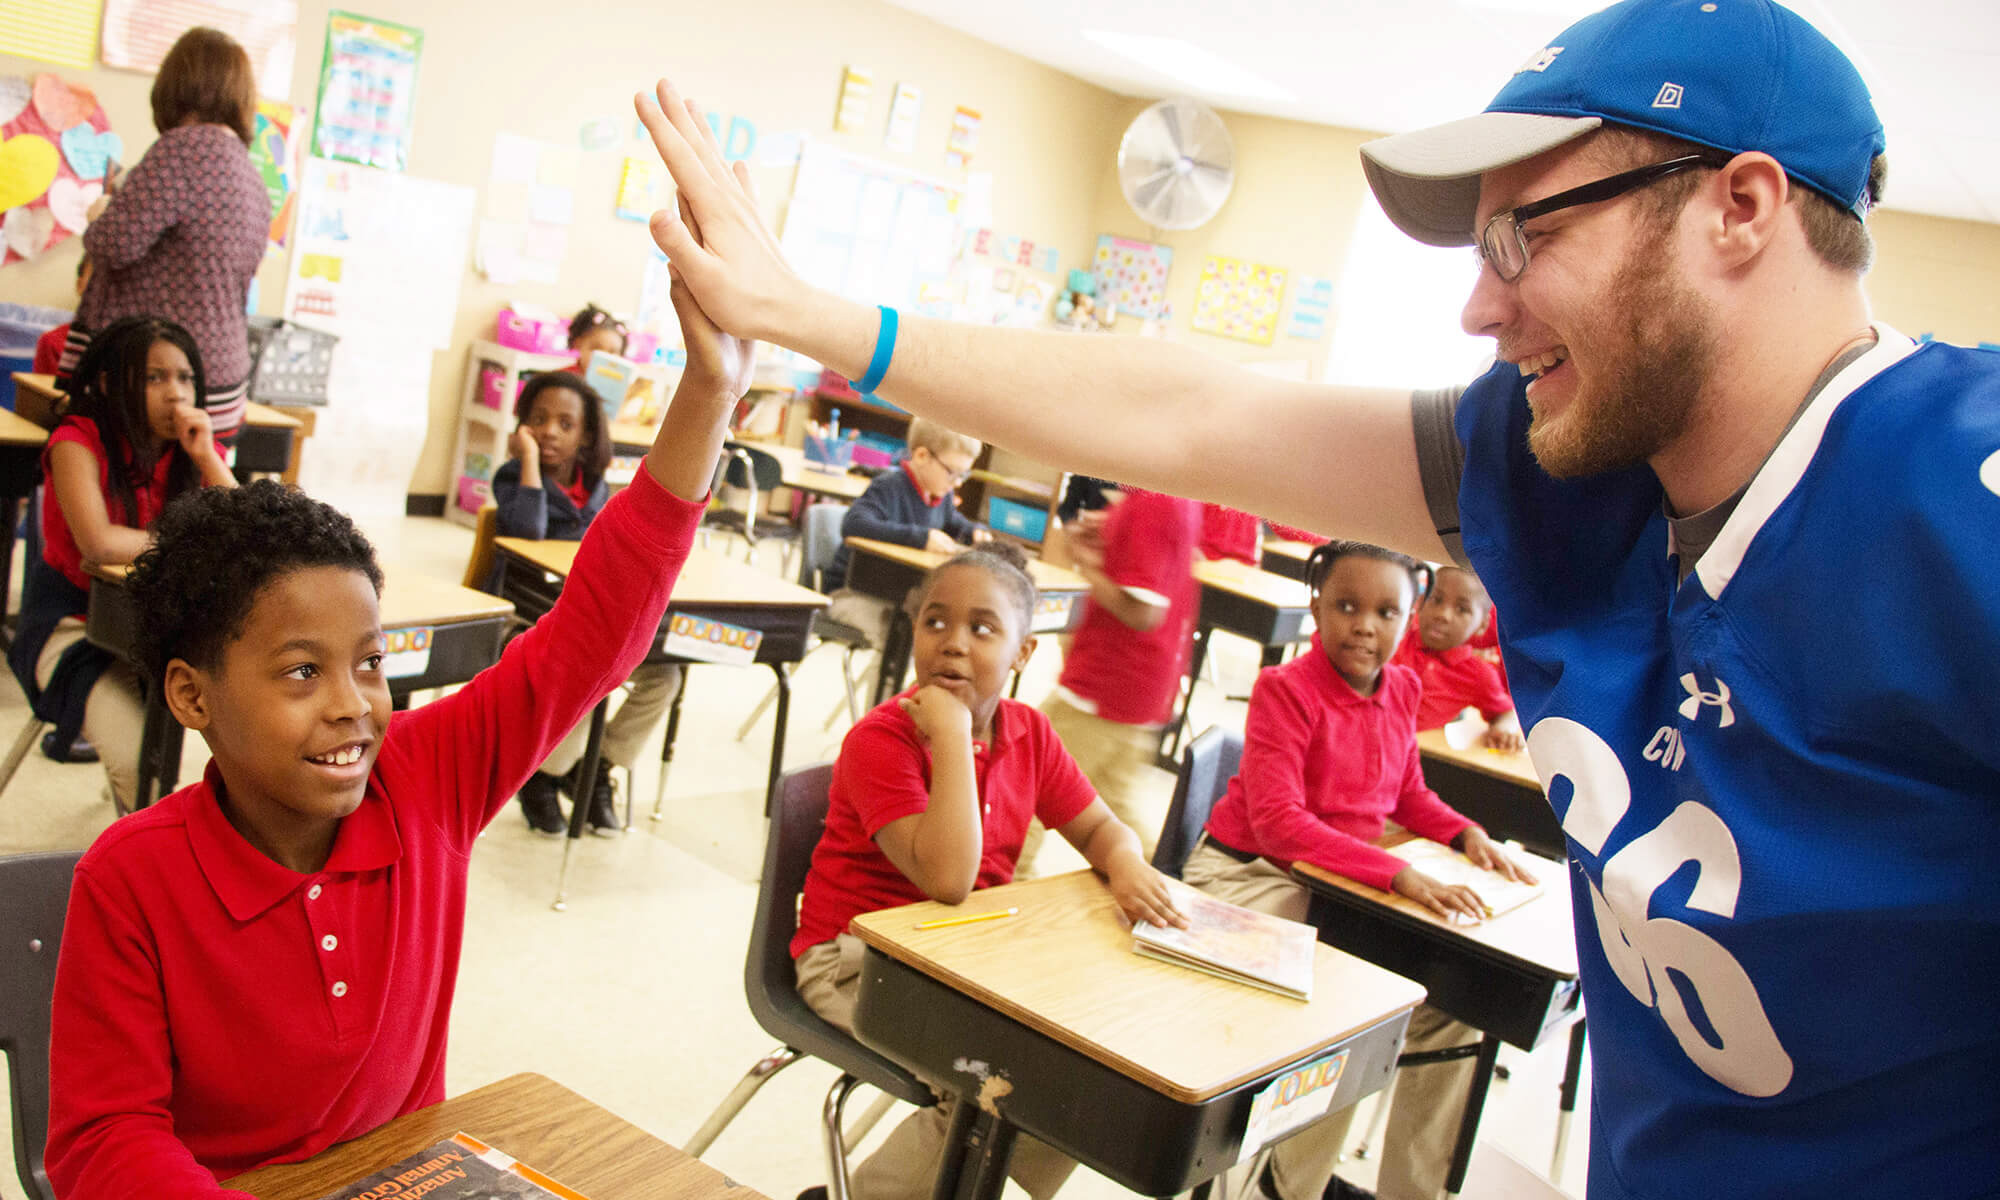 A CUW student gives a student from Northwest Lutheran a high-five on April 19 during a 